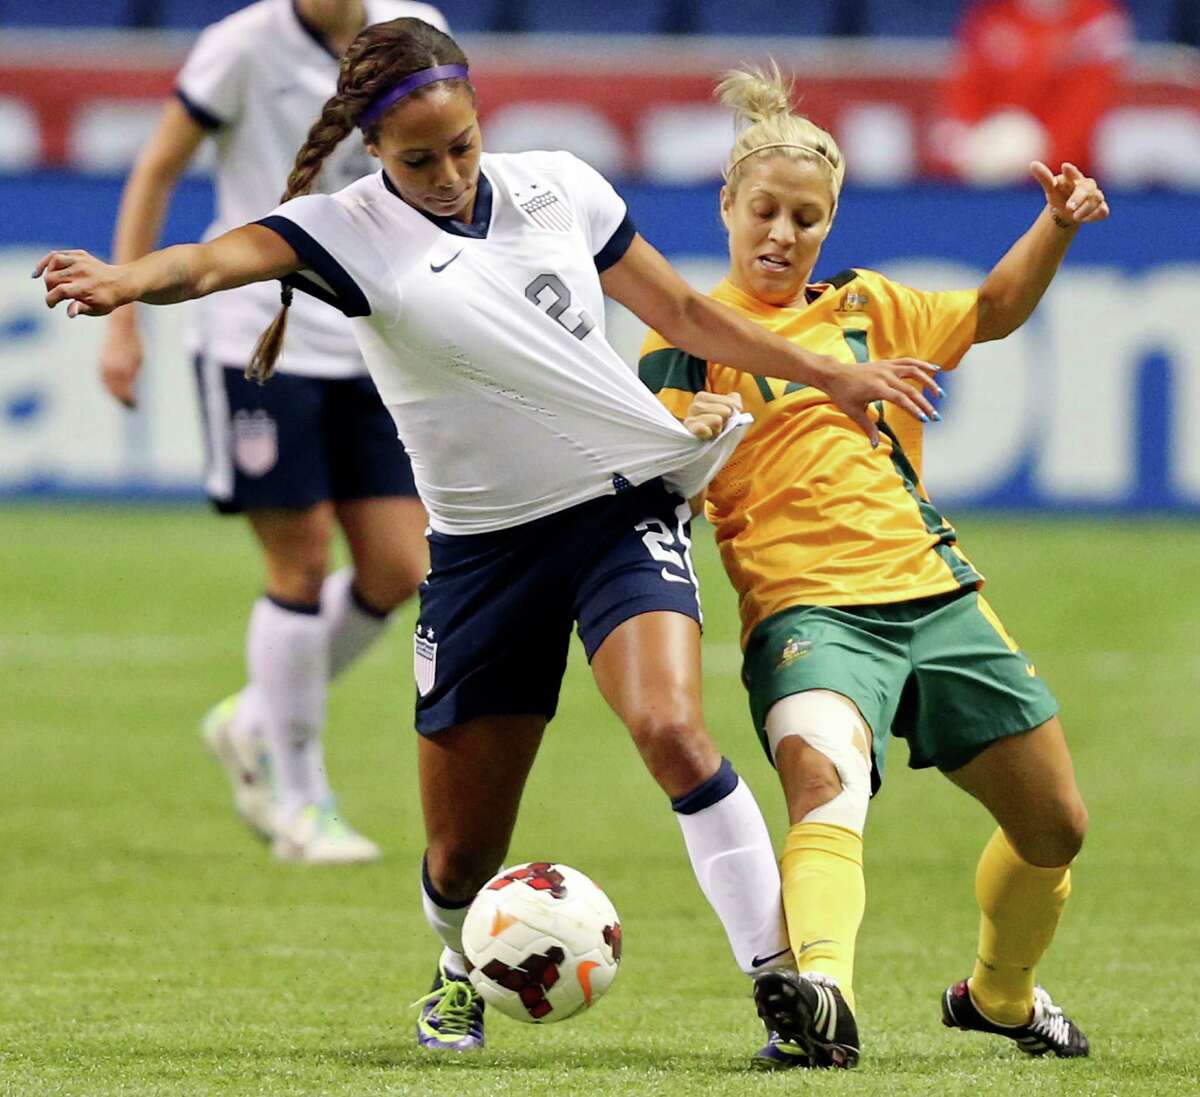 United States of America's Sydney Leroux and Australia's Katrina Gorry battle for control of the ball during first half action of an international friendly soccer match Sunday Oct. 20, 2013 at the Alamodome.